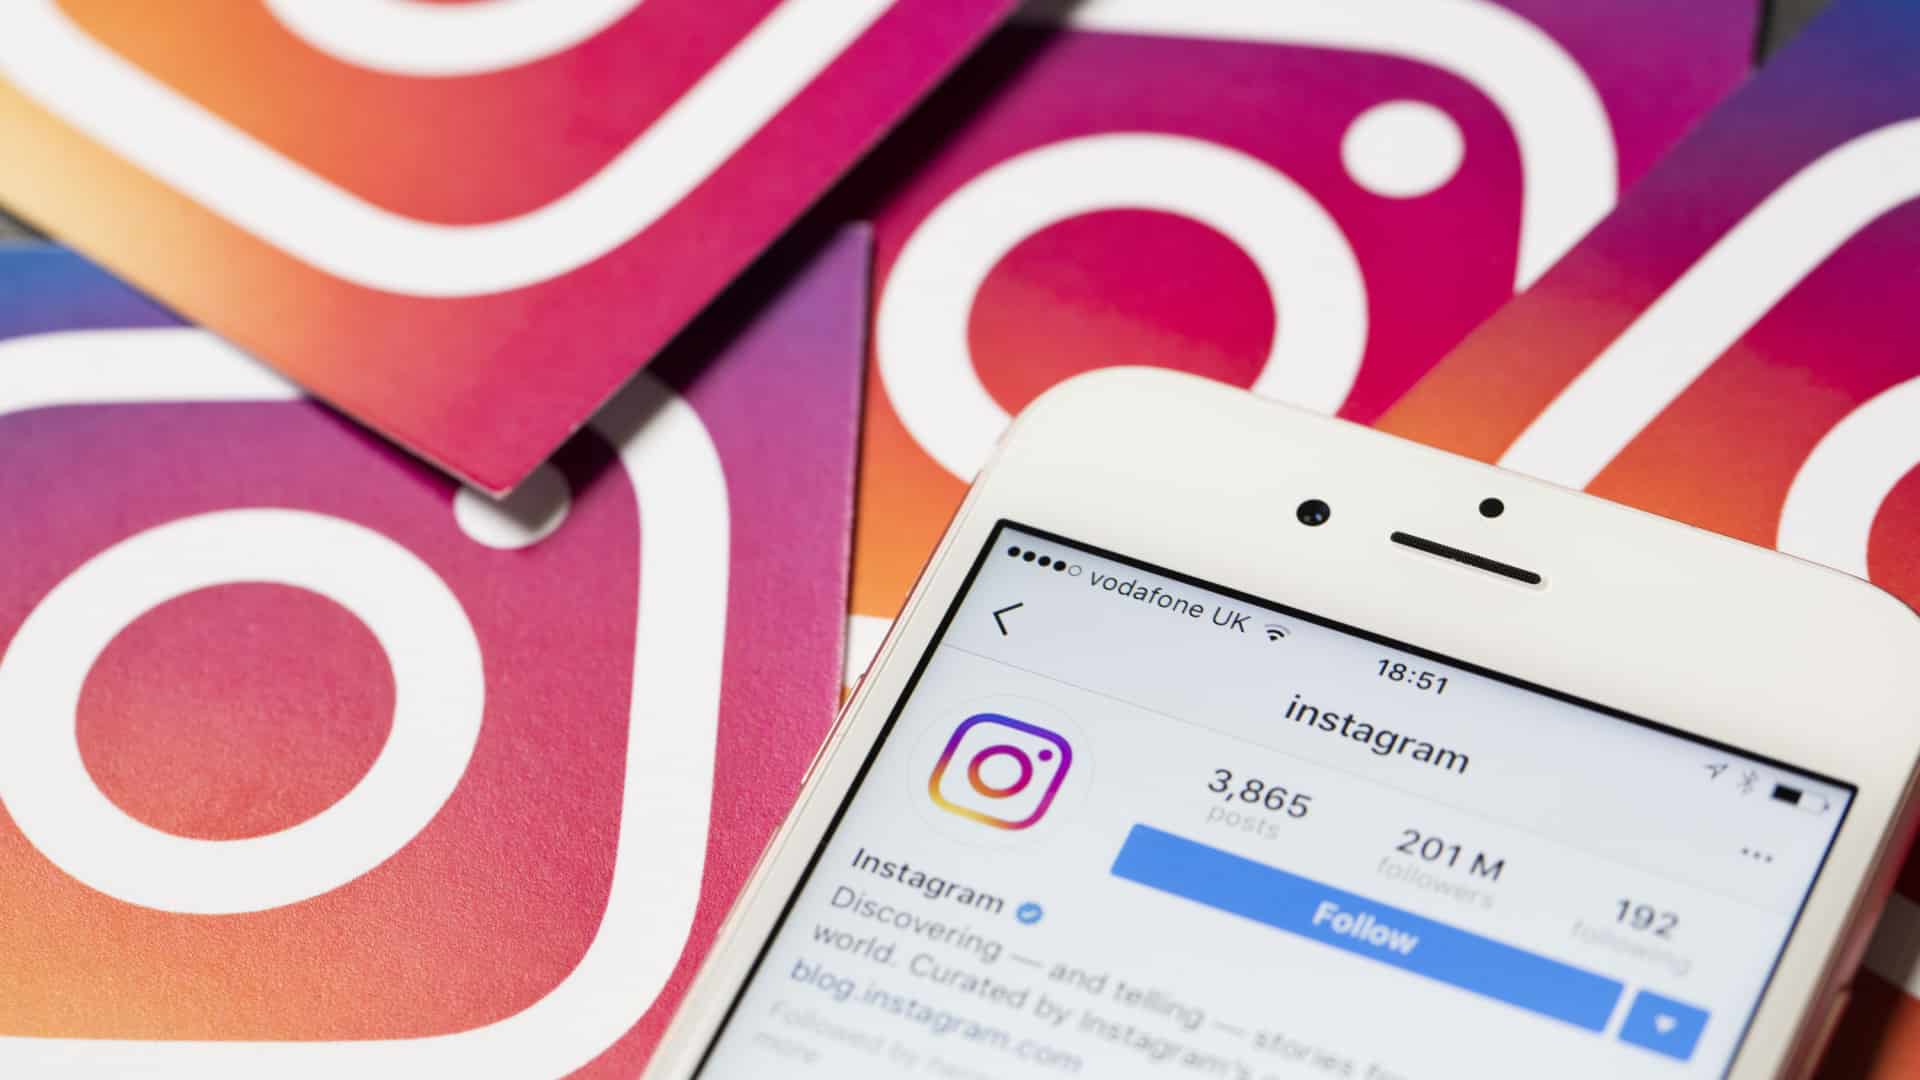 Instagram rolls out subscription feature to 10 more countries